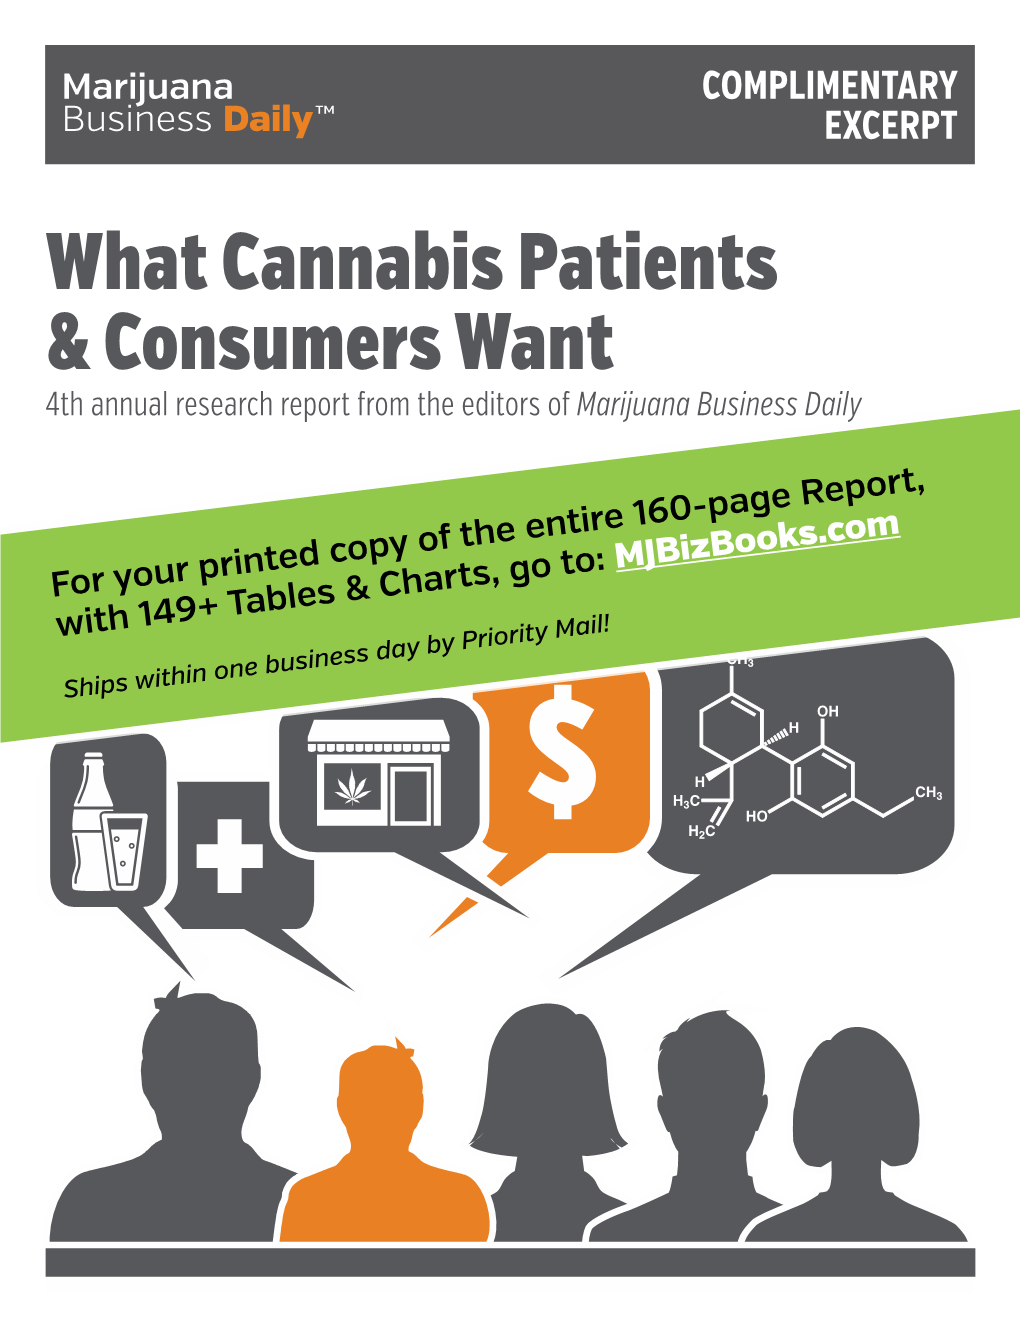 What Cannabis Patients & Consumers Want